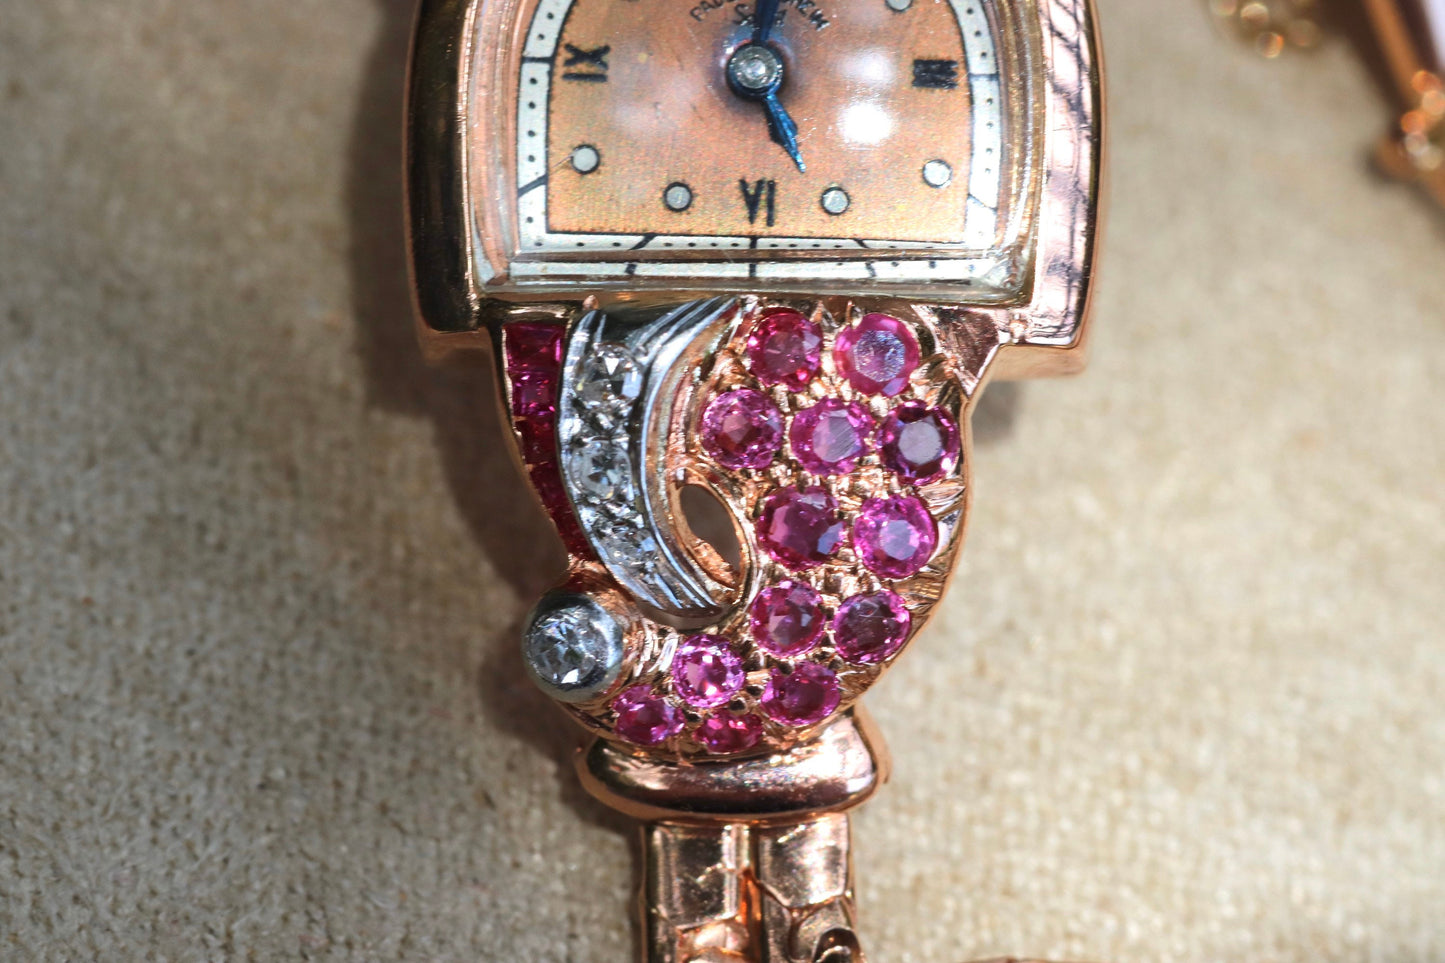 14k solid rose gold retro Paul Ditisheim wristwatch with rubies and diamonds 7.25”